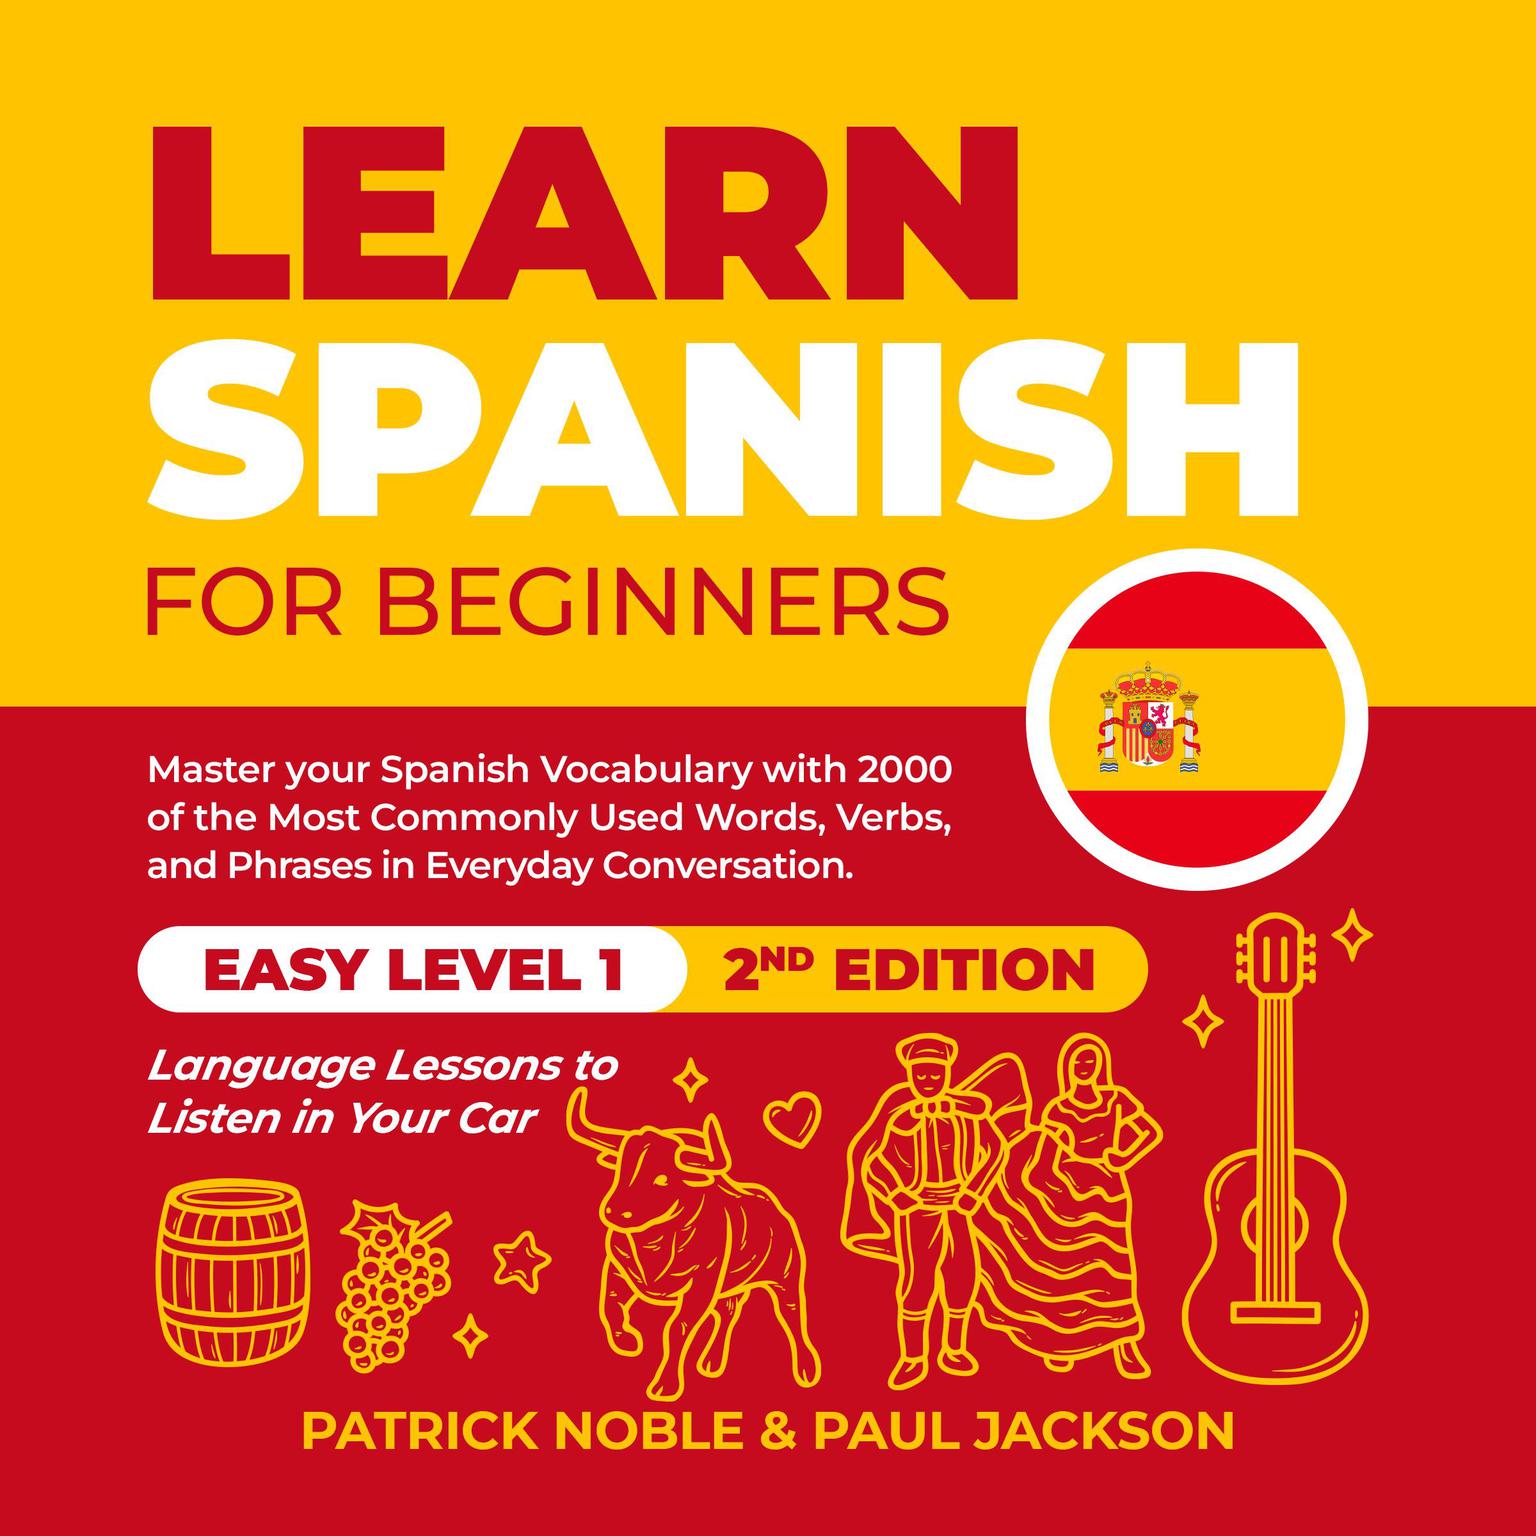 Learn Spanish for Beginners: Master your Spanish Vocabulary with 2000 of the Most Commonly used Words, Verbs and Phrases in Everyday Conversation. Easy Level 1 Language Lessons to Listen in your Car (2nd Edition) Audiobook, by Patrick Noble